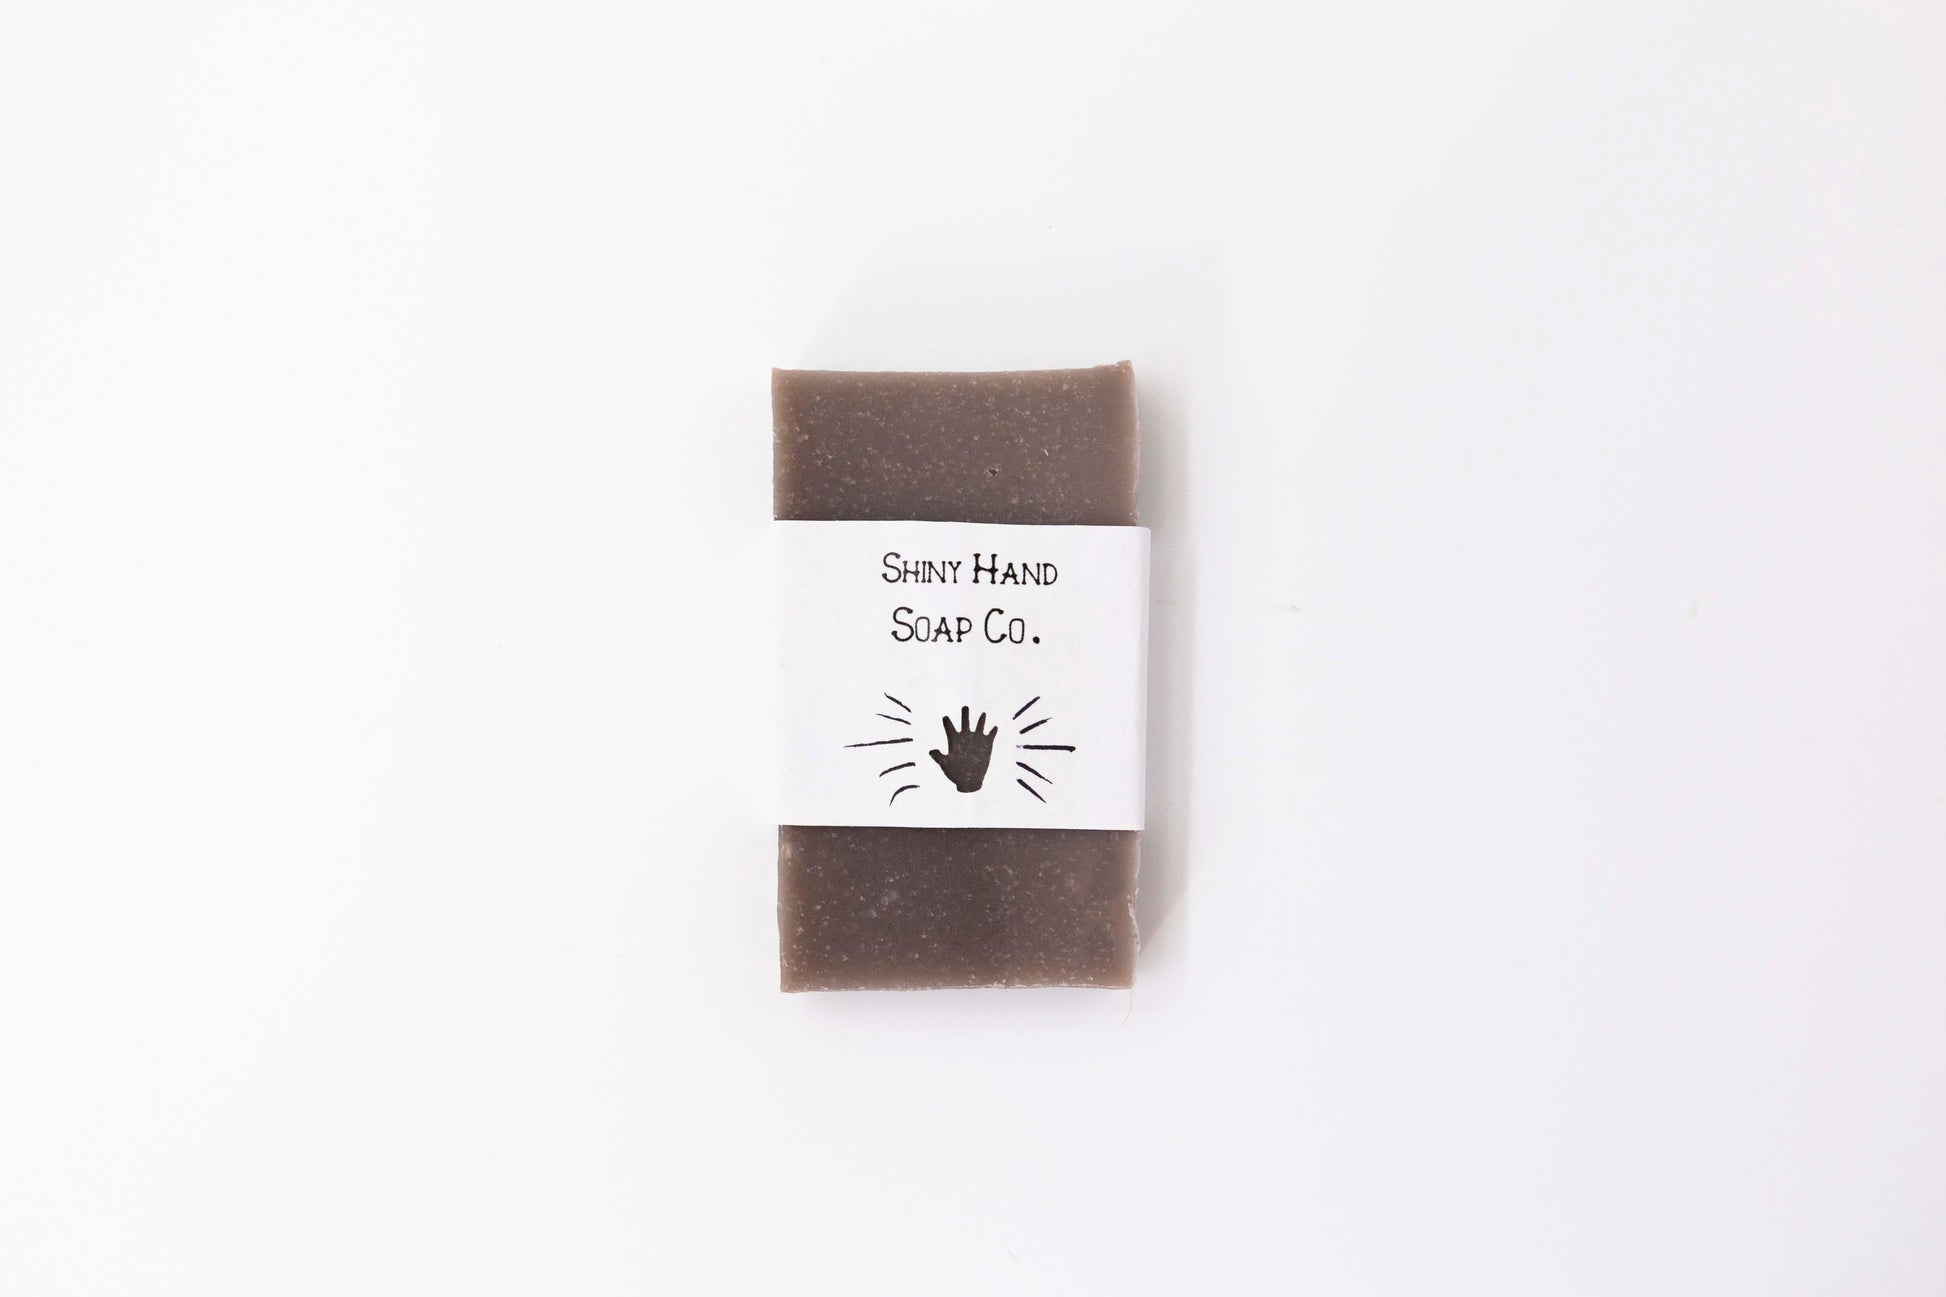 A brown cedarwood patchouli miniature bar soap sits on a clean white background wrapped in a small paper wrapper with a hand cut out of it.